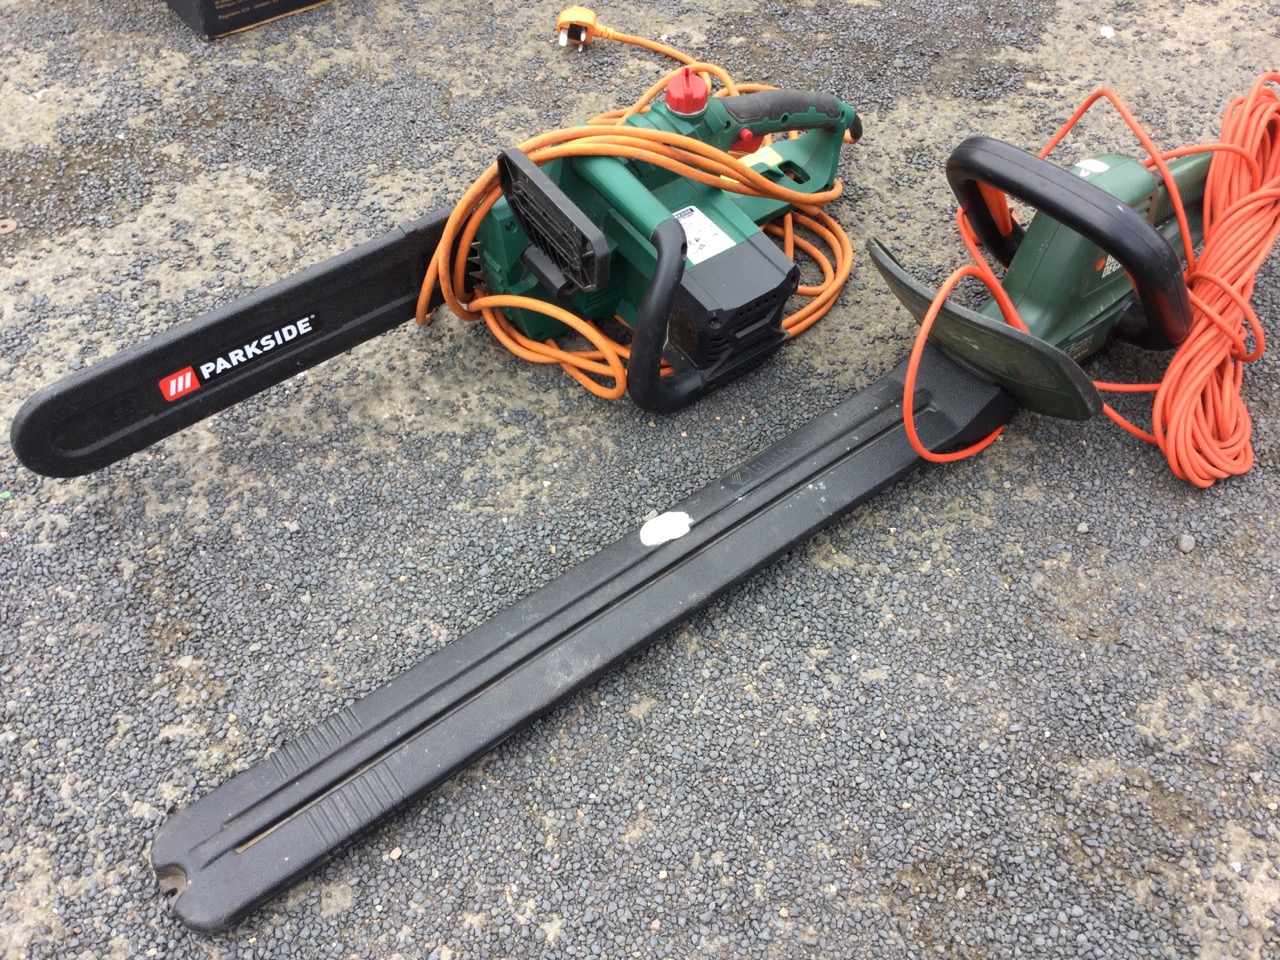 A Black & Decker 500w electric hedgecutter with long cable; and a Parkside electric chainsaw. (2)